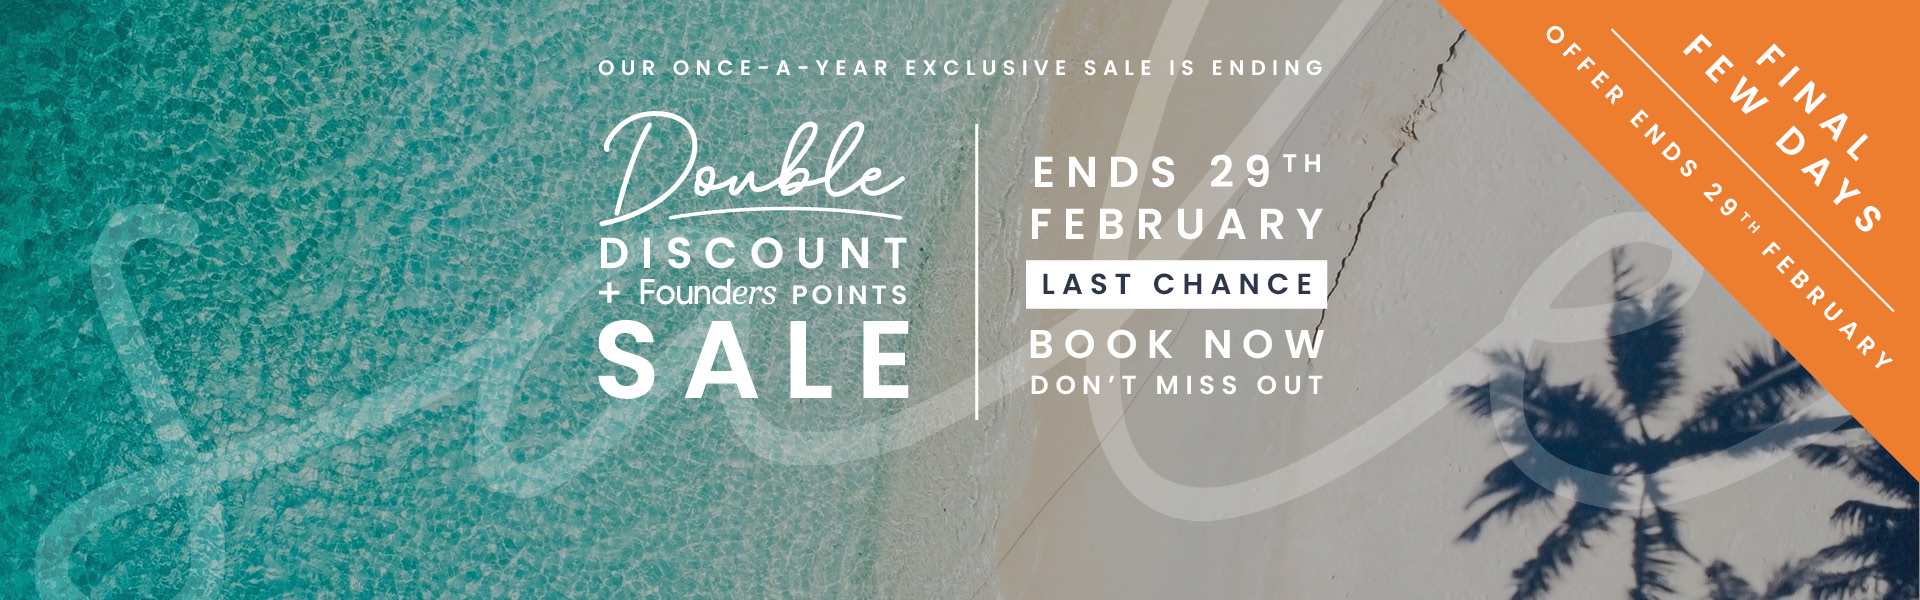 Double Discount and Founders Points - Book by 29th February